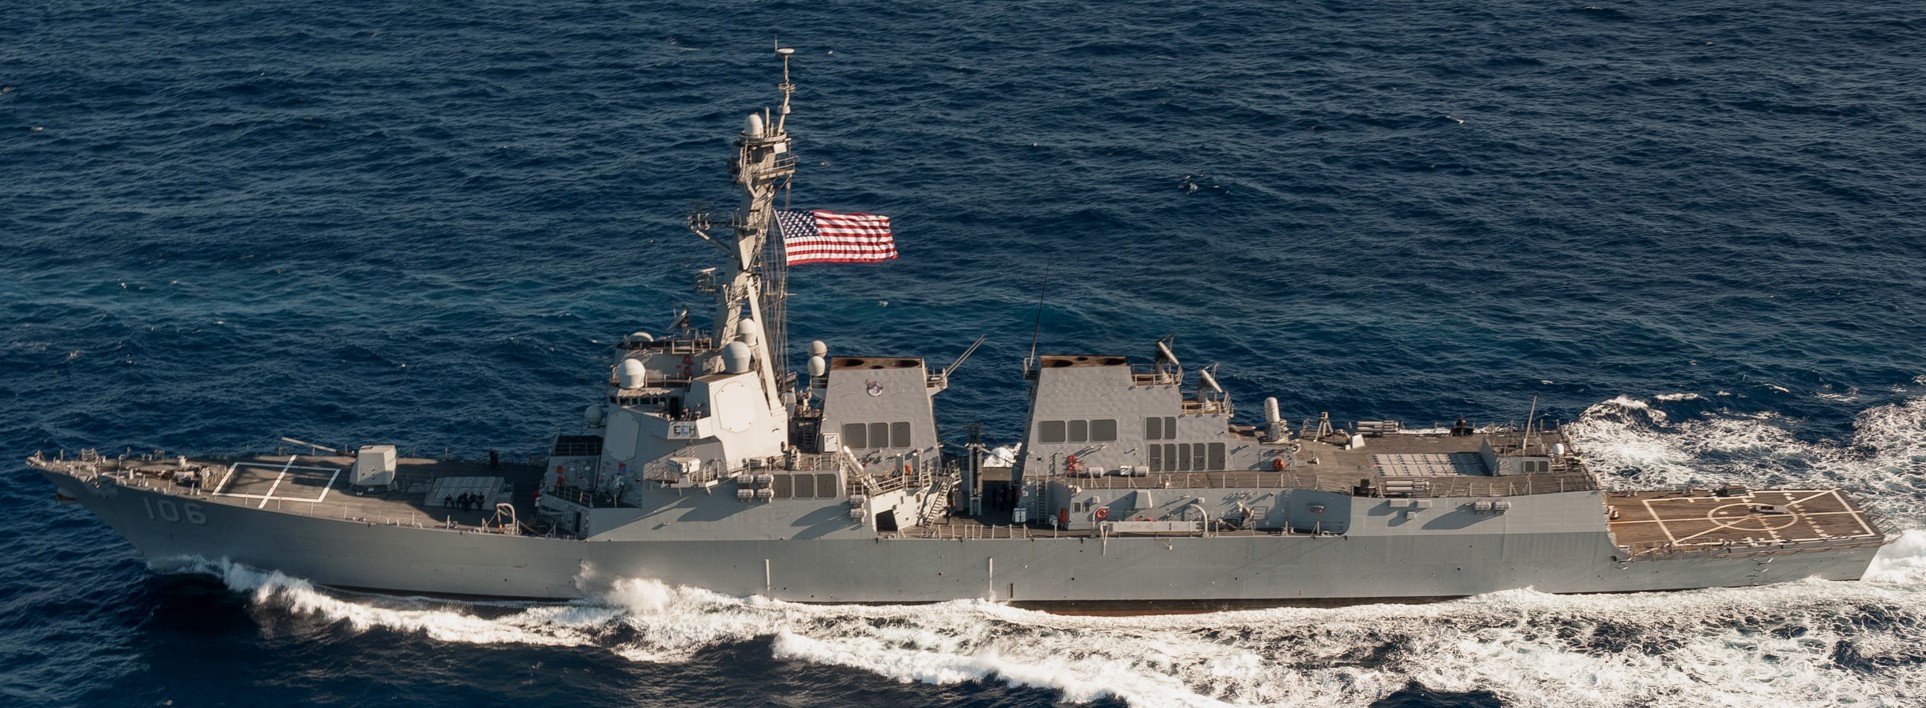 ddg-106 uss stockdale arleigh burke class guided missile destroyer aegis us navy south china sea 44